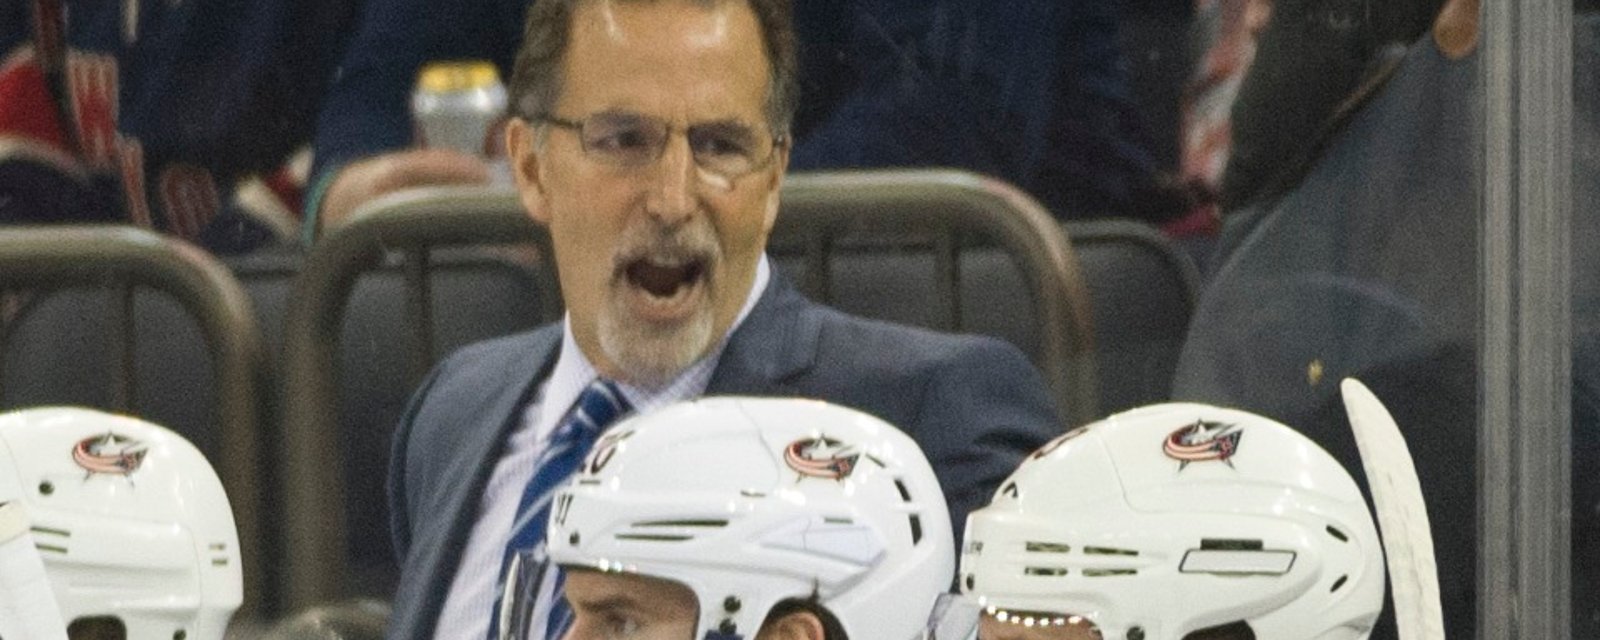 NHL tries to call out John Tortorella and it backfires horribly.